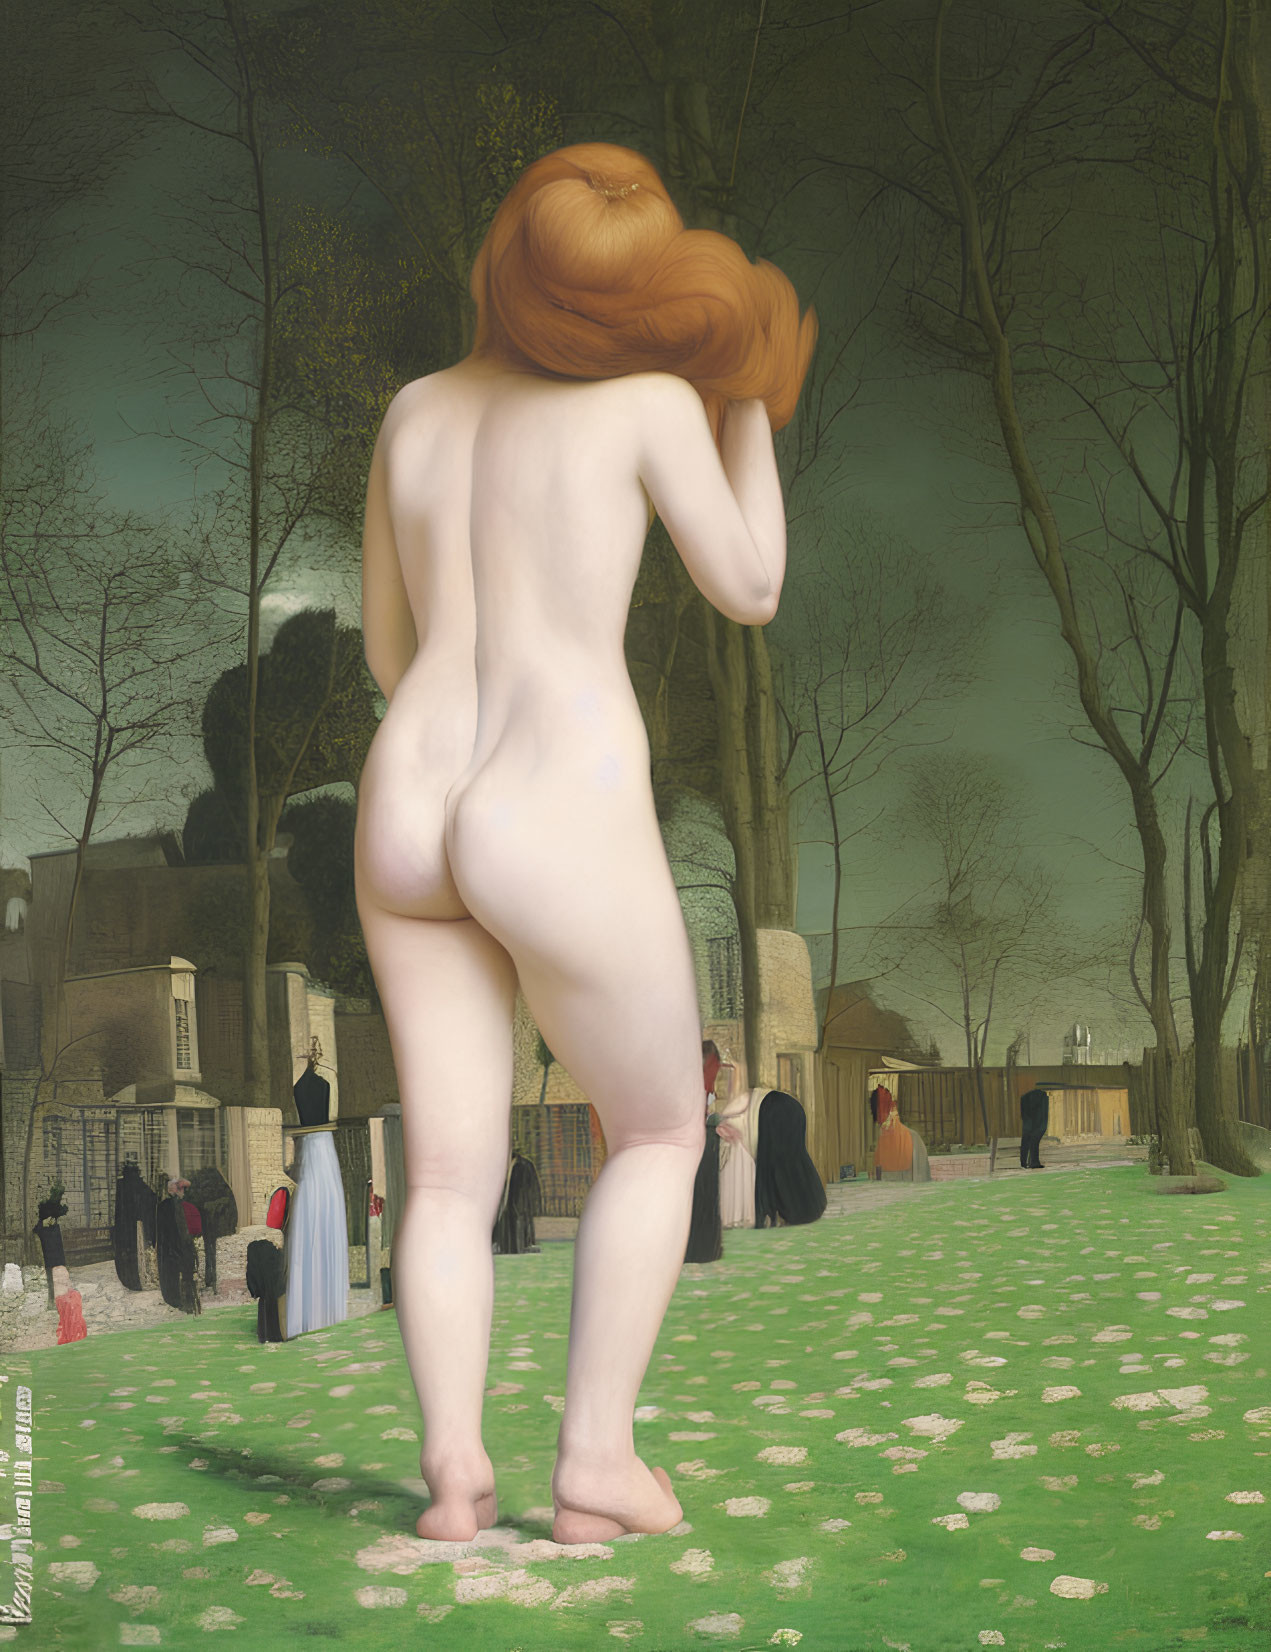 Red-haired nude woman in grassy field facing clothed crowd in park